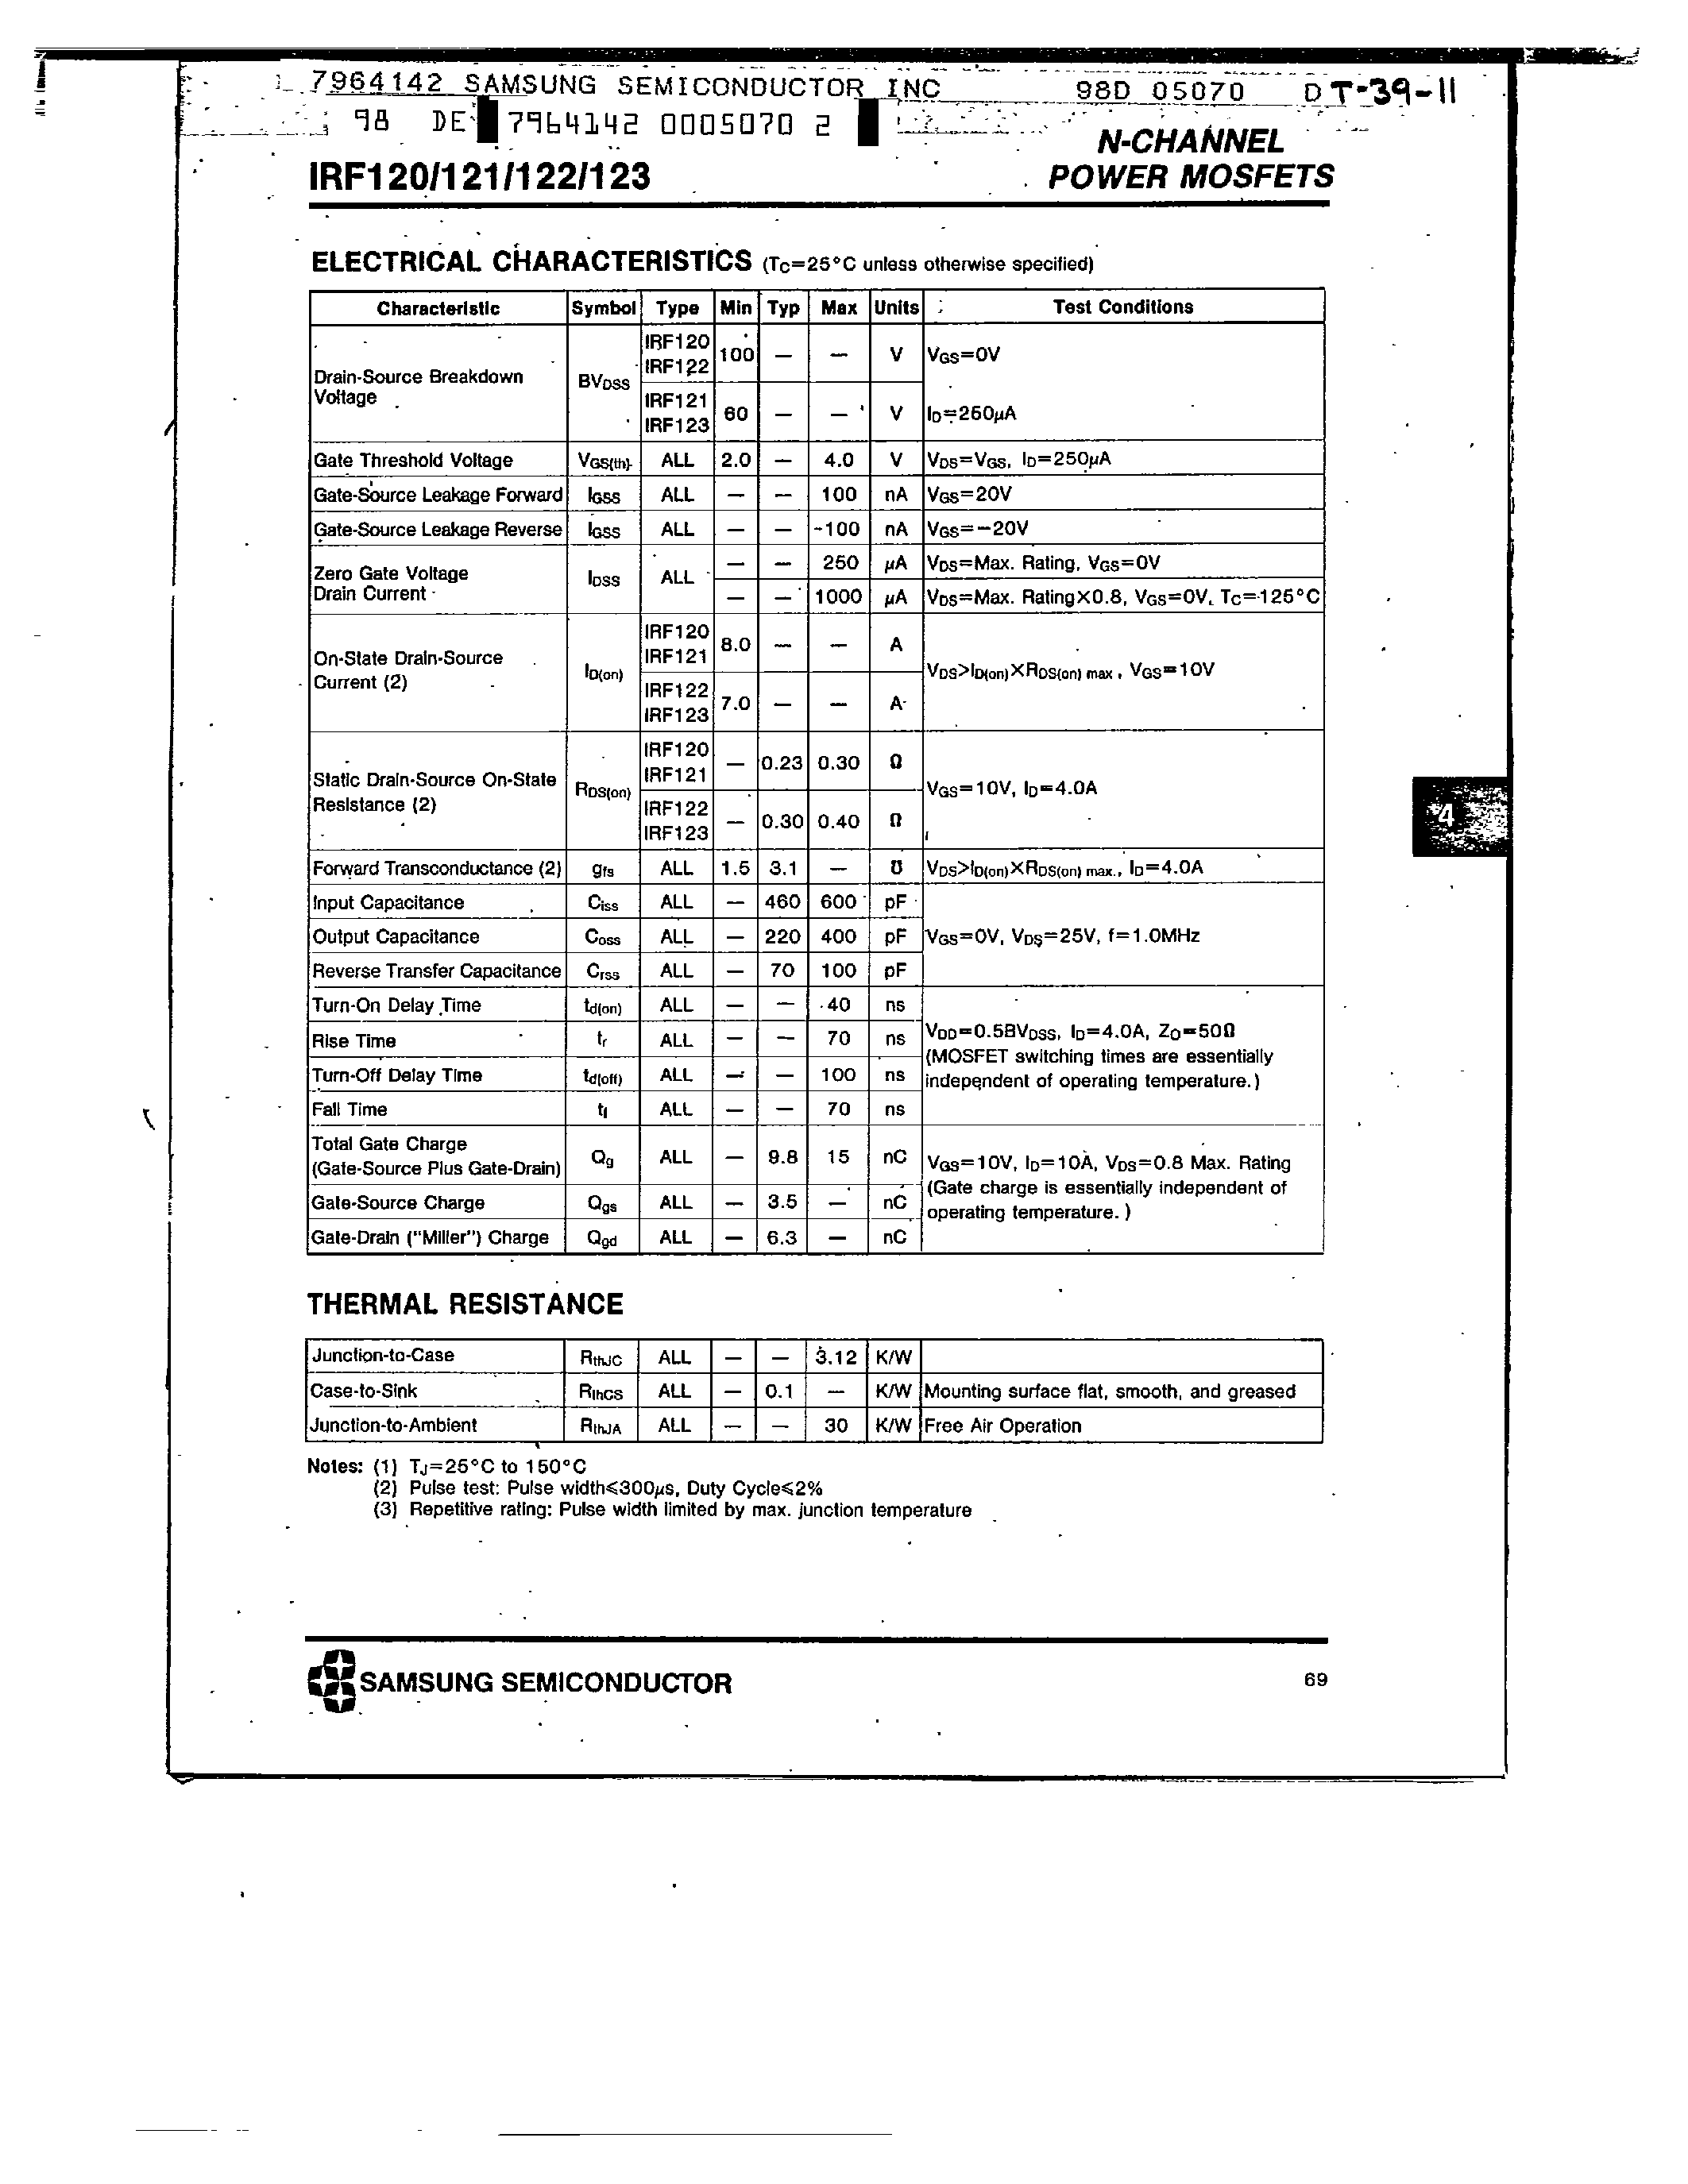 Datasheet IRF120 - N-CHANNEL POWER MOSFETS page 2